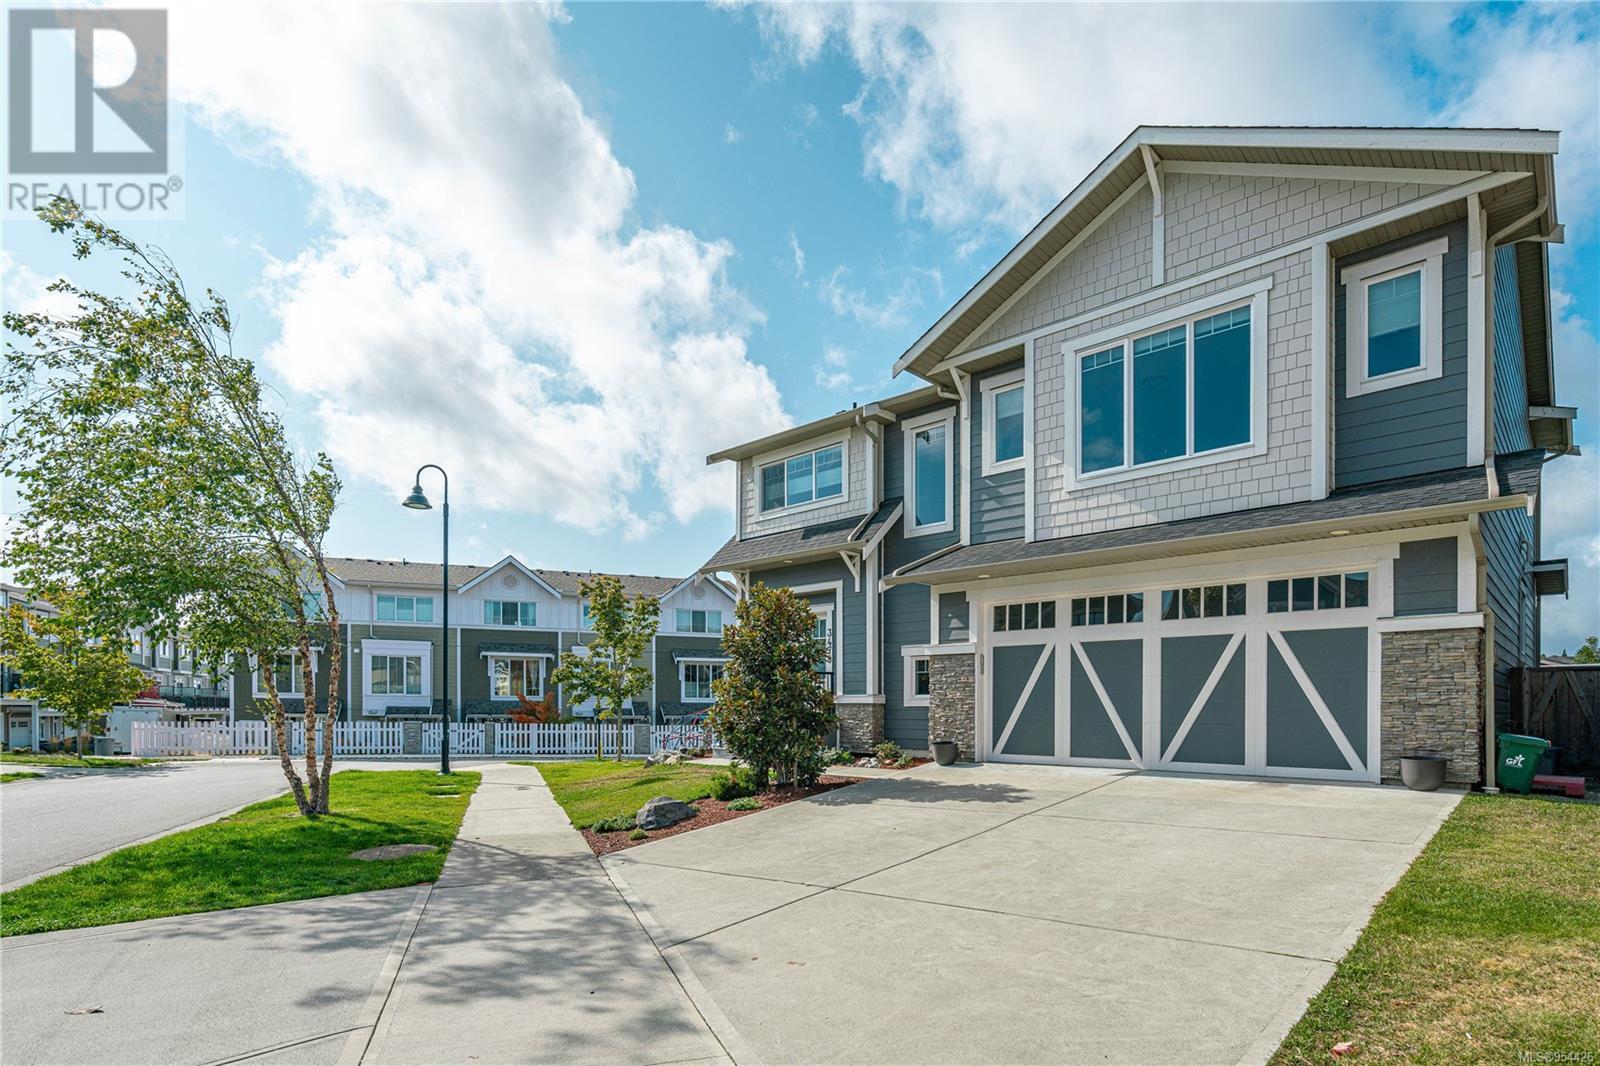 3478 Curlew St located in Colwood, British Columbia